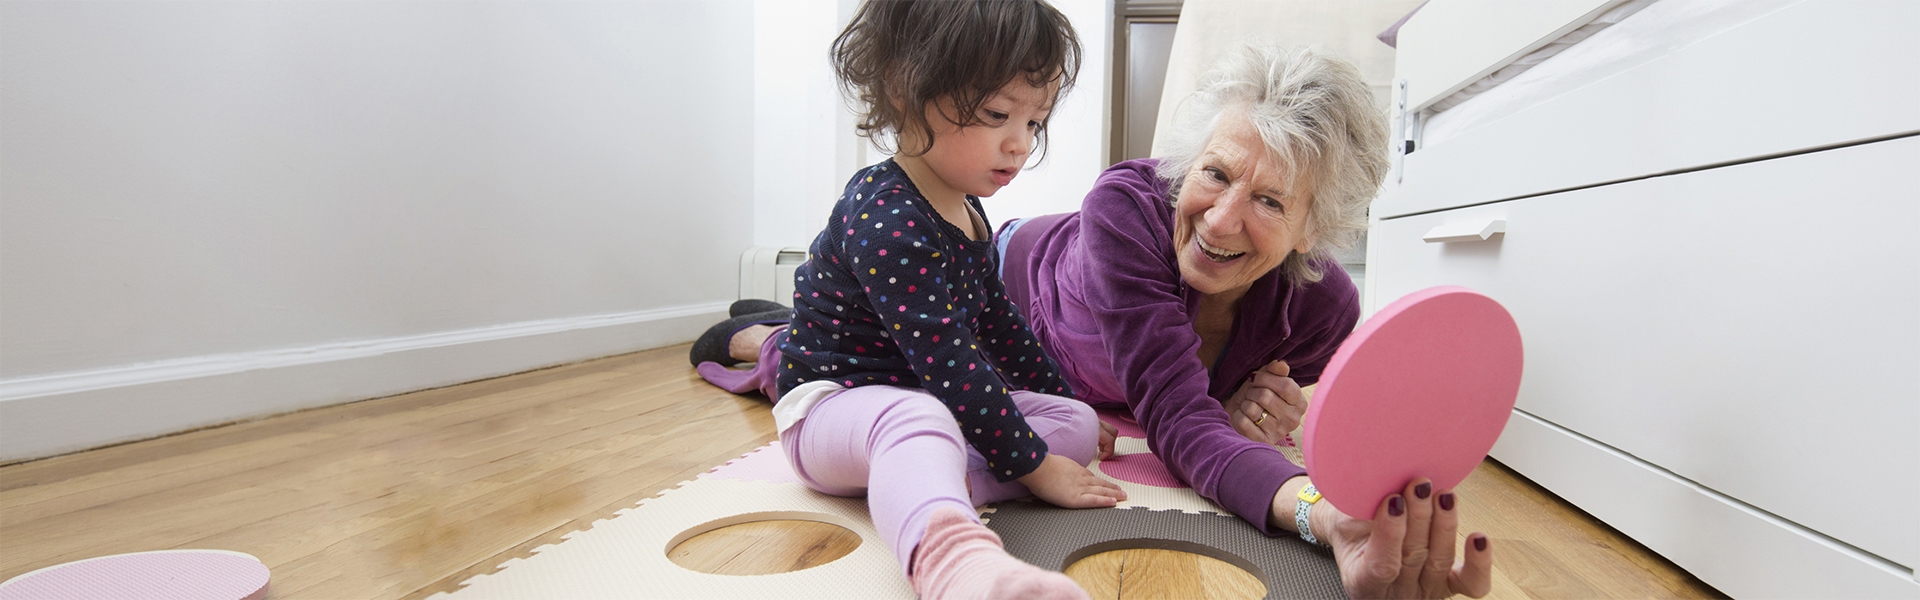 Happy grandmother playing with granddaughter on floor